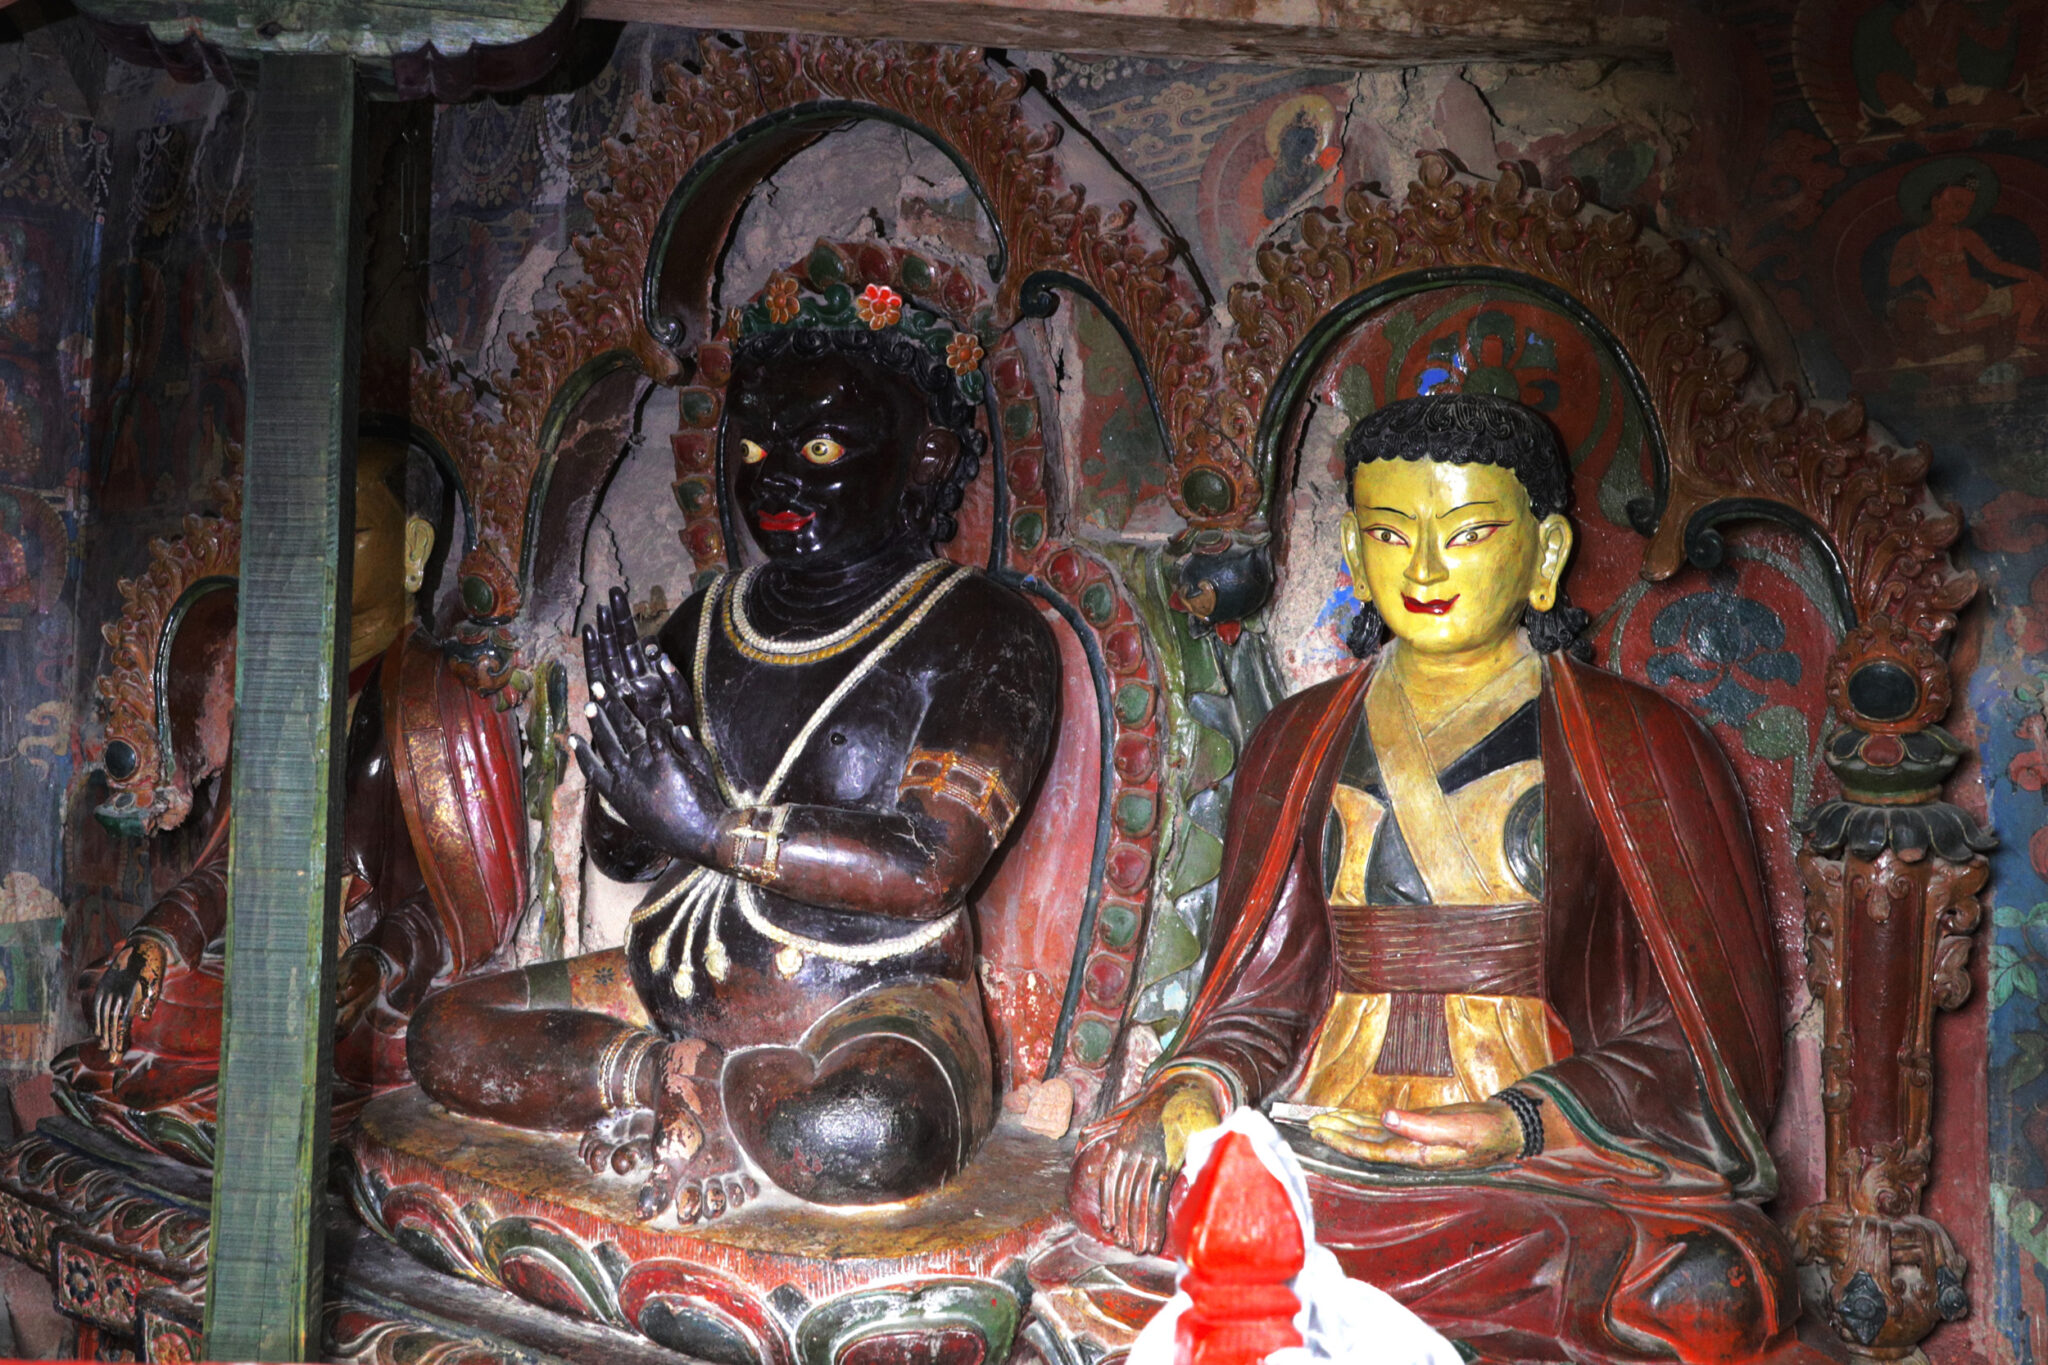 Two polychrome statues depicting seated figures: at left, Yogi with hands in mudras; at right, red-robed spiritual leader